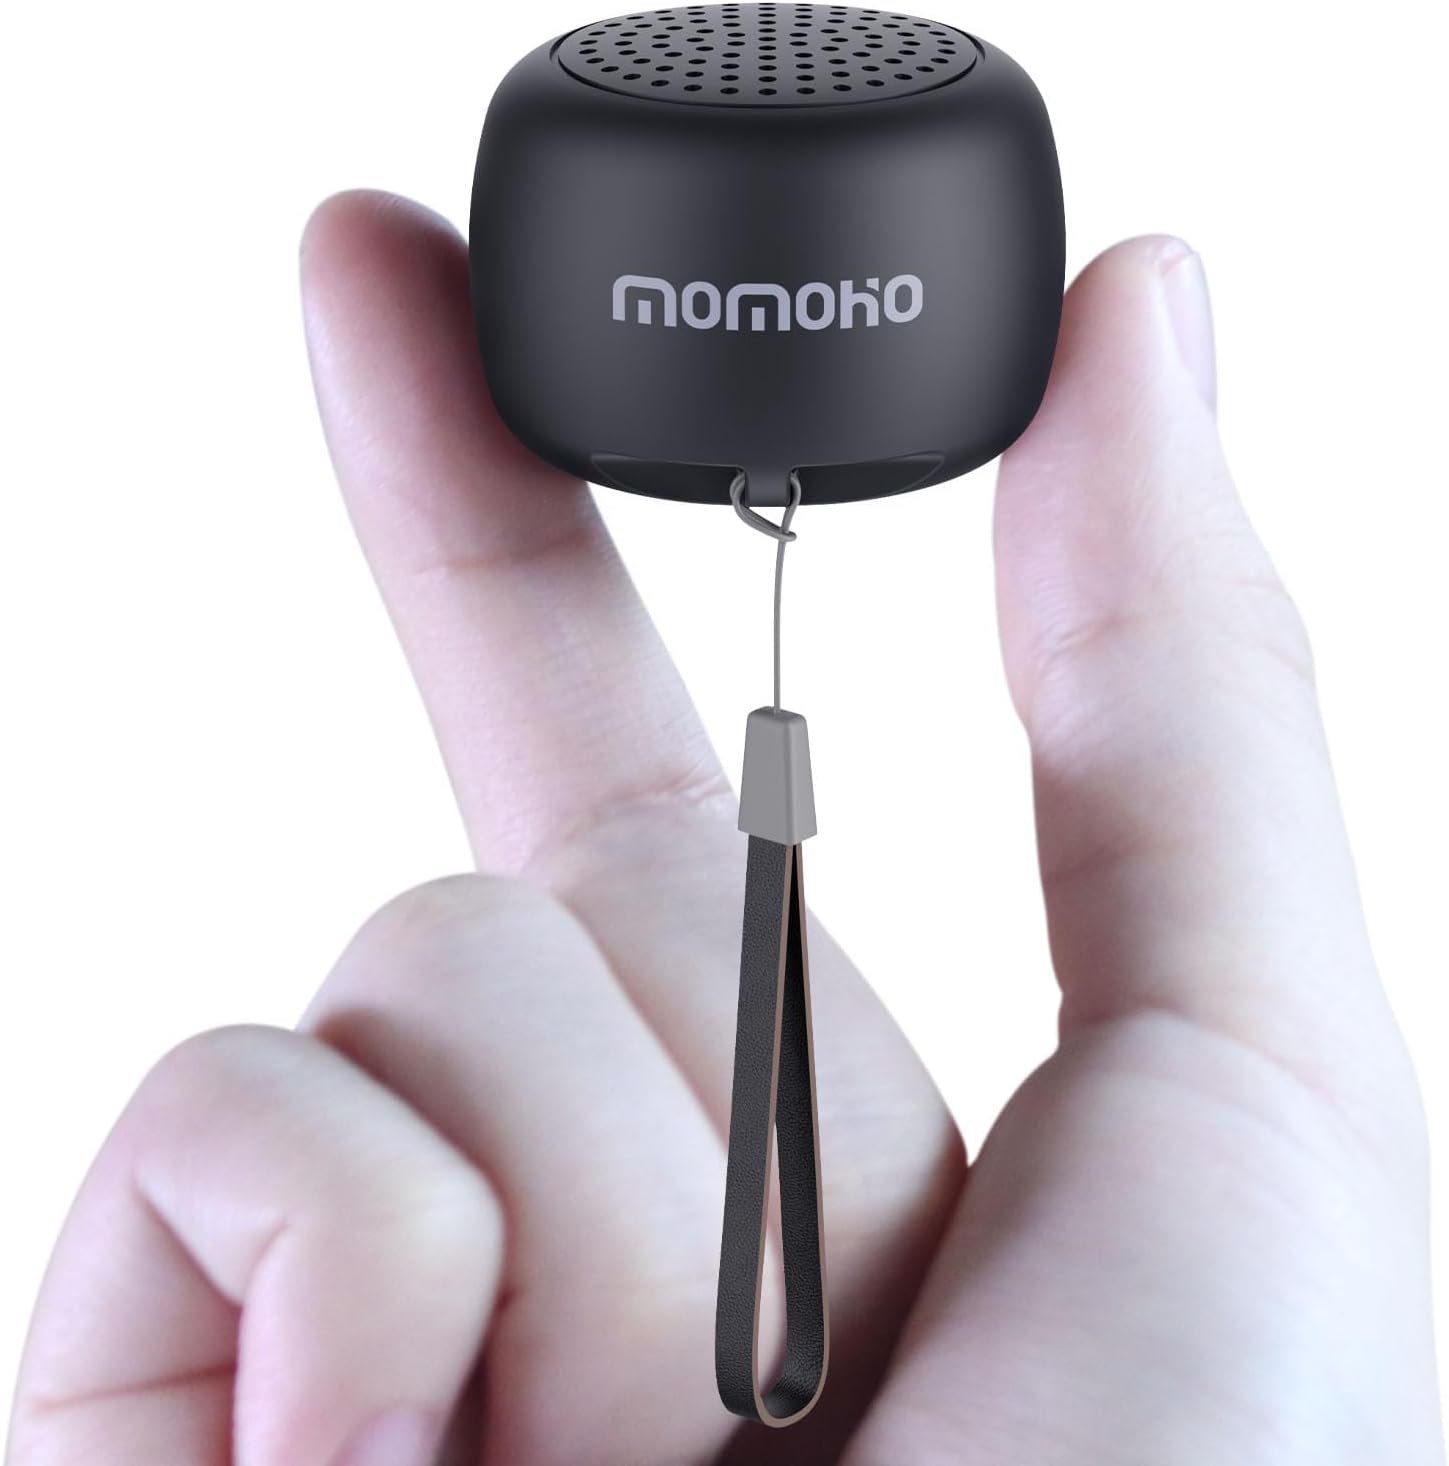 MOMOHO The Smallest Mini Bluetooth Speaker Wireless Small Bluetooth Speakers with Built in Mic,TWS Pairing Portable Speaker for Gifts/Home/Outdoor/Travel, Smartphone, Laptop (Black)